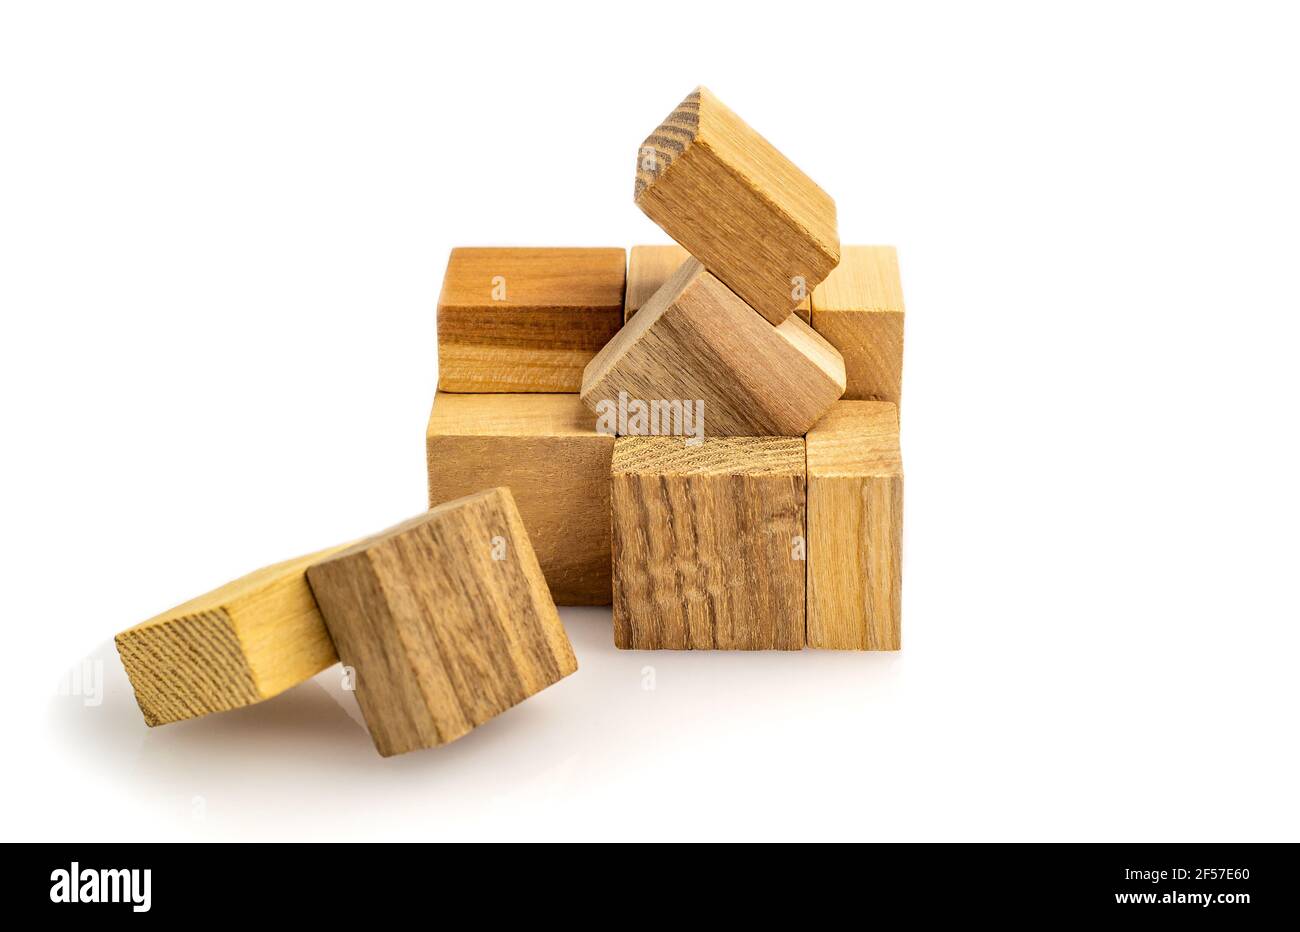 Puzzle cubes of wooden blocks isolated on white background. defocused close-up. Business success concept. Layout for presentation. Stock Photo